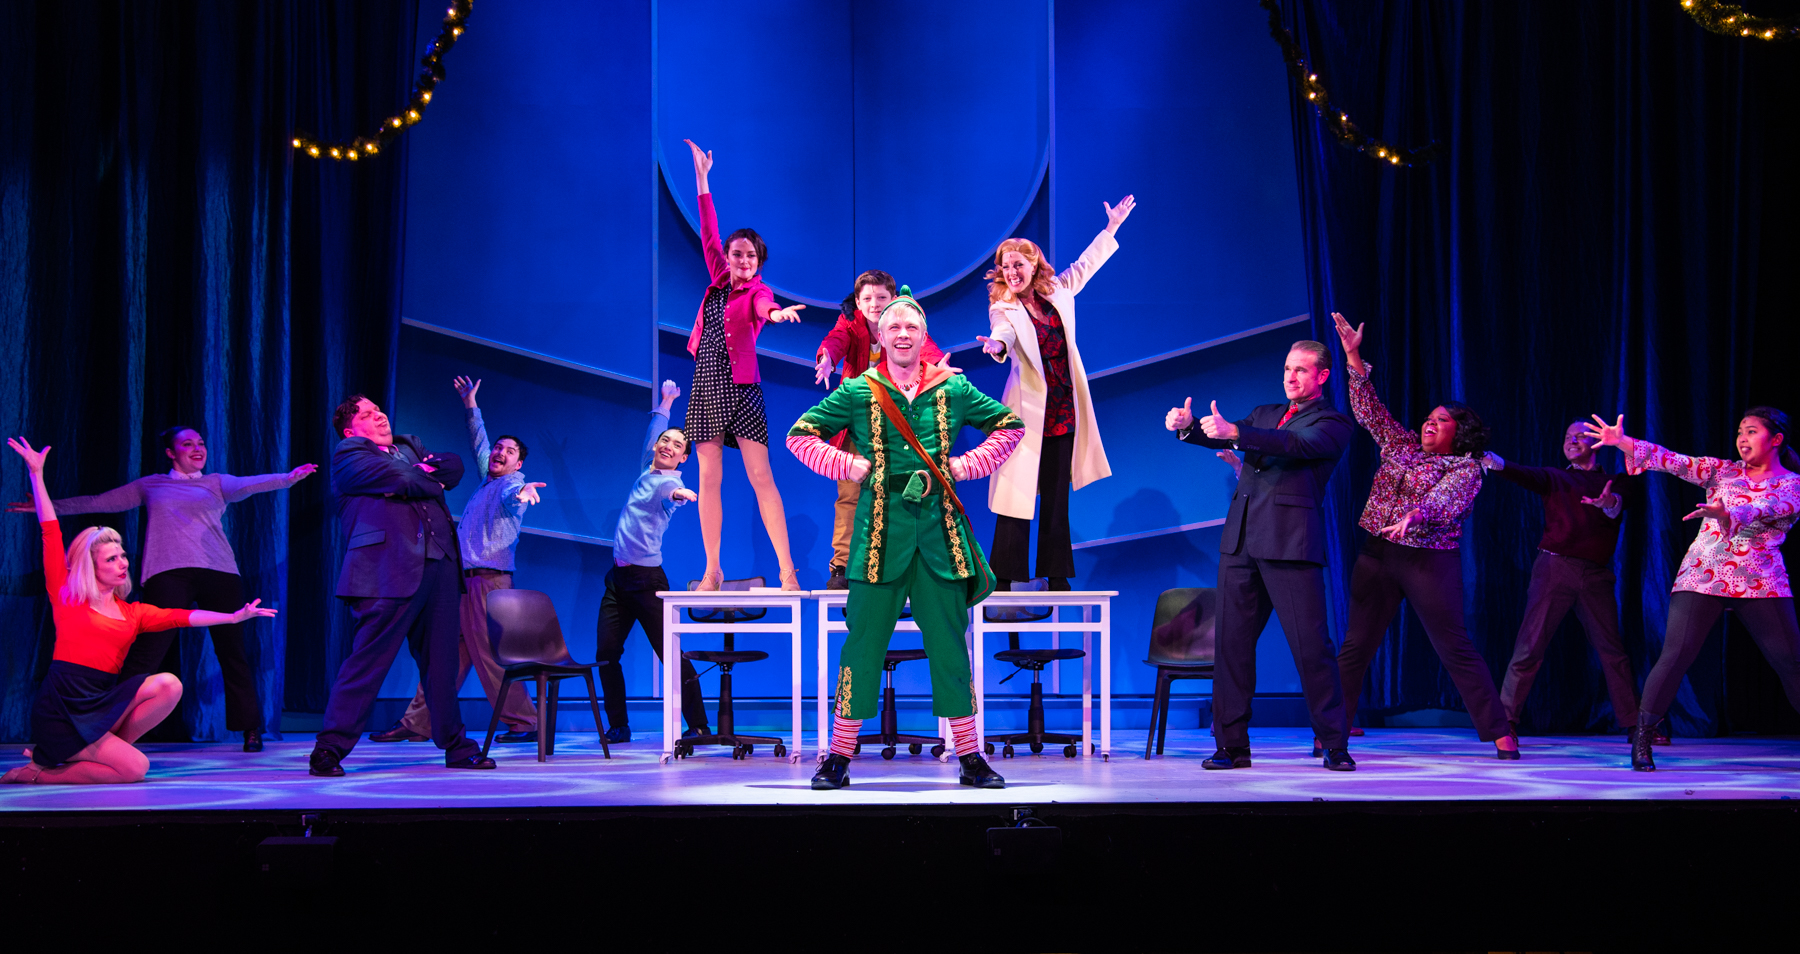 Timoth Fraser as Buddy the Elf with the cast of Elf The Musical. Photo by Russ Rowland